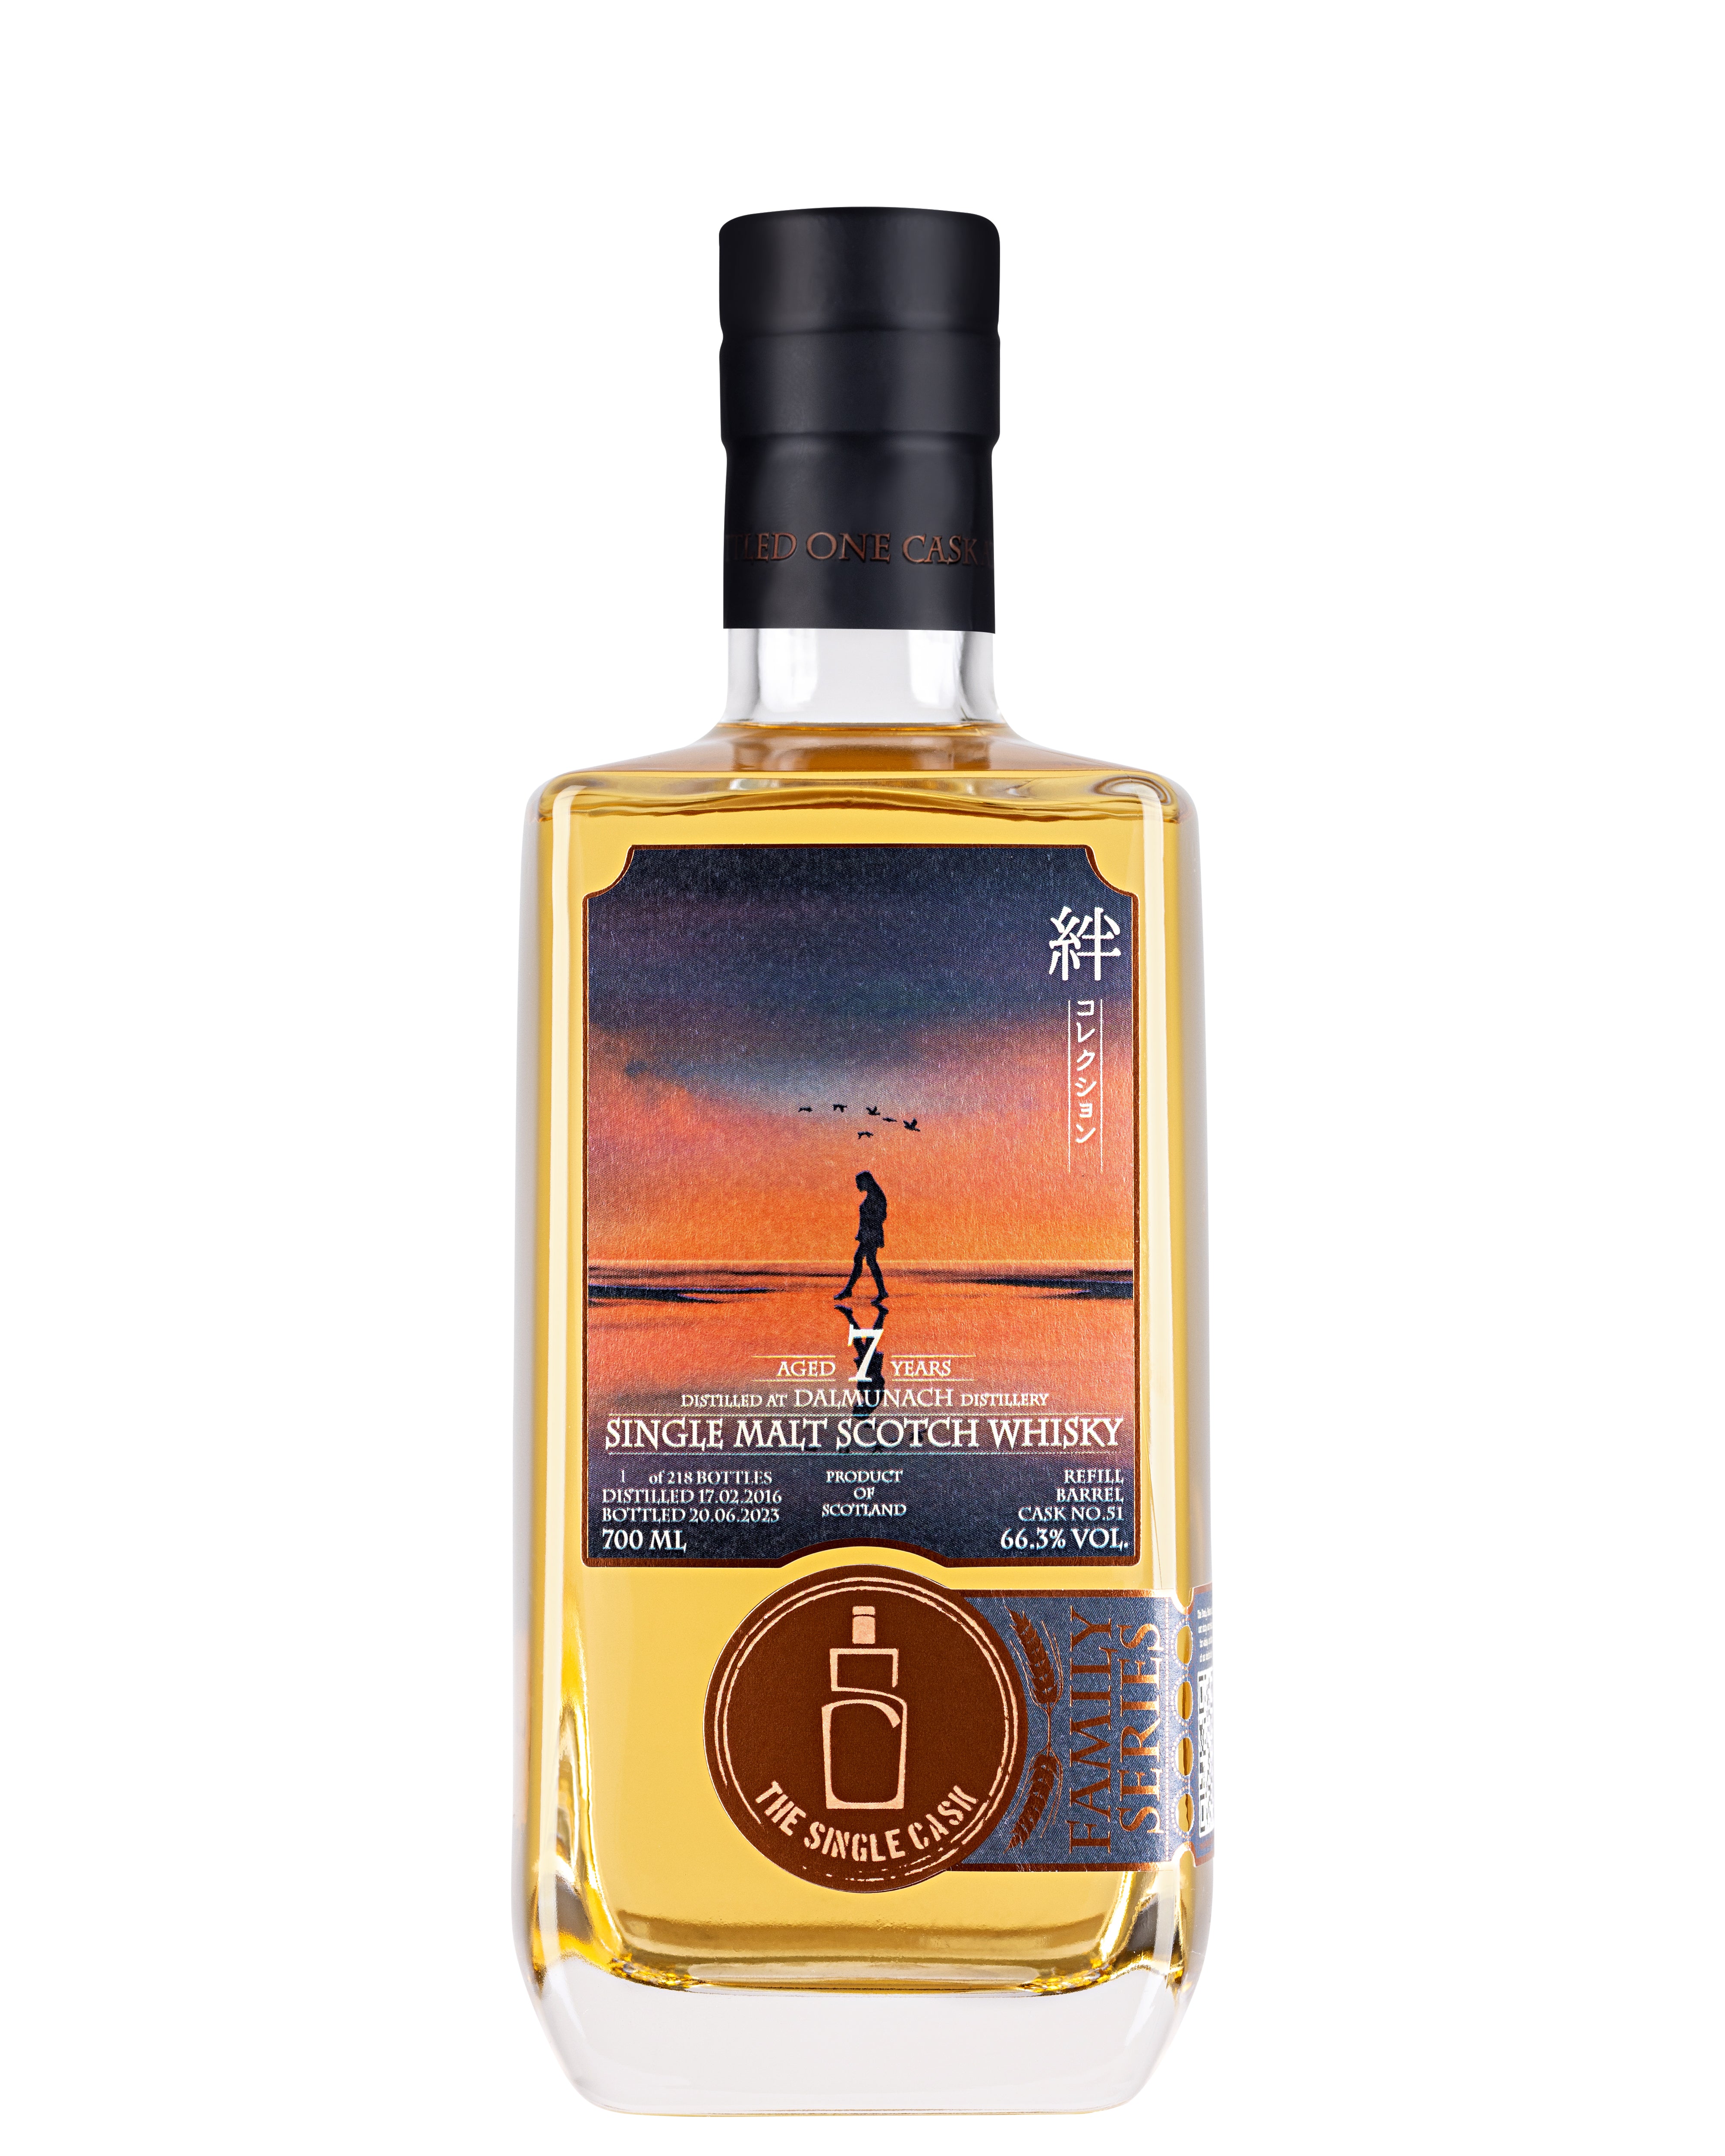 Dalmunach 7 years old whisky (cask 51)